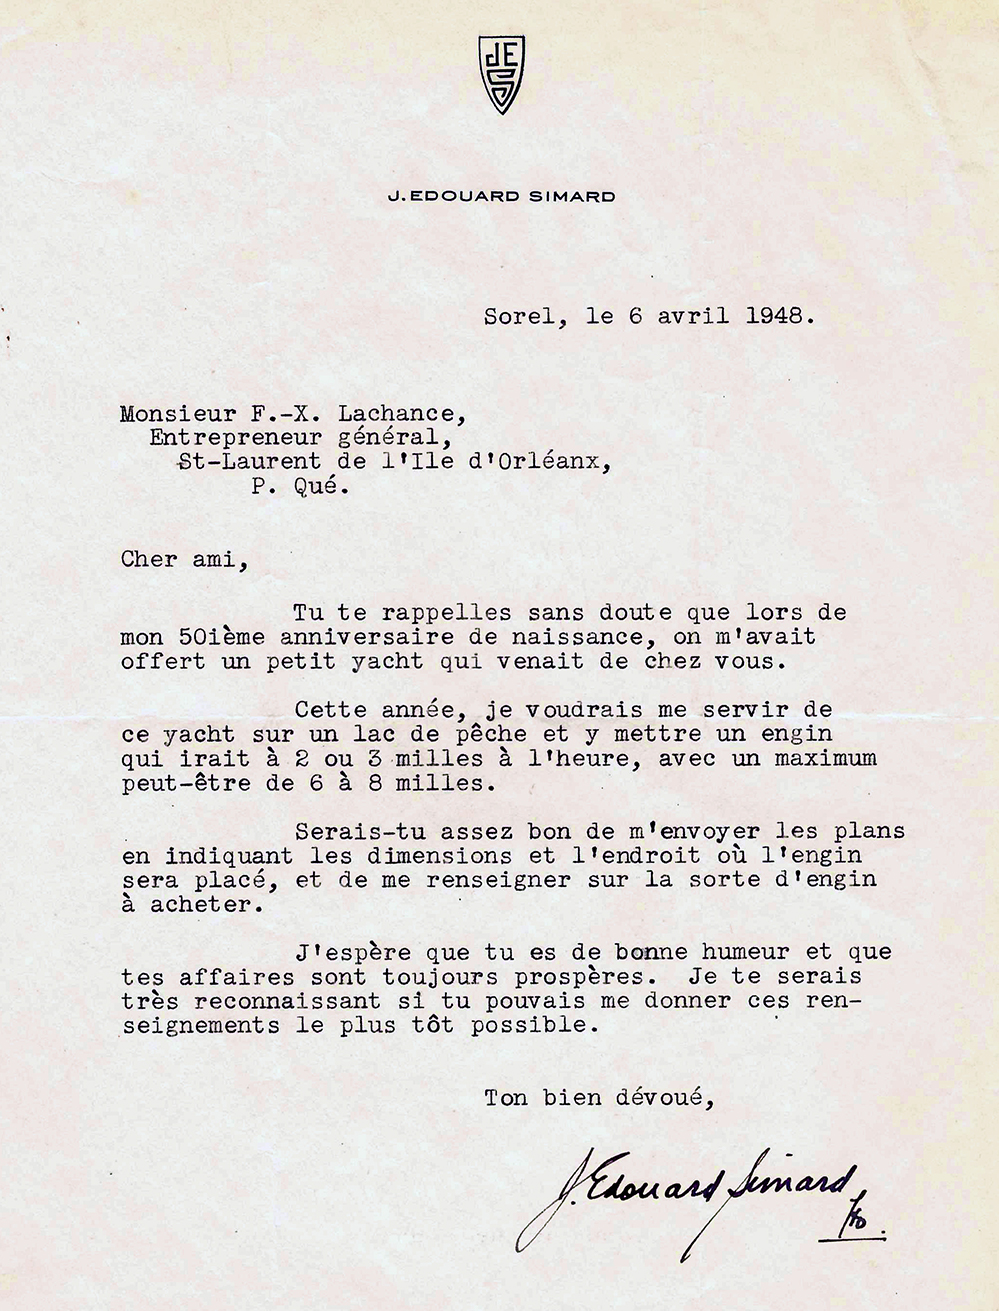 Letter typed by J. Édouard Simard, addressed to François-Xavier Lachance. This letter is signed by Mr. Simard. His logo, which includes the initials "JES", is on the letterhead.